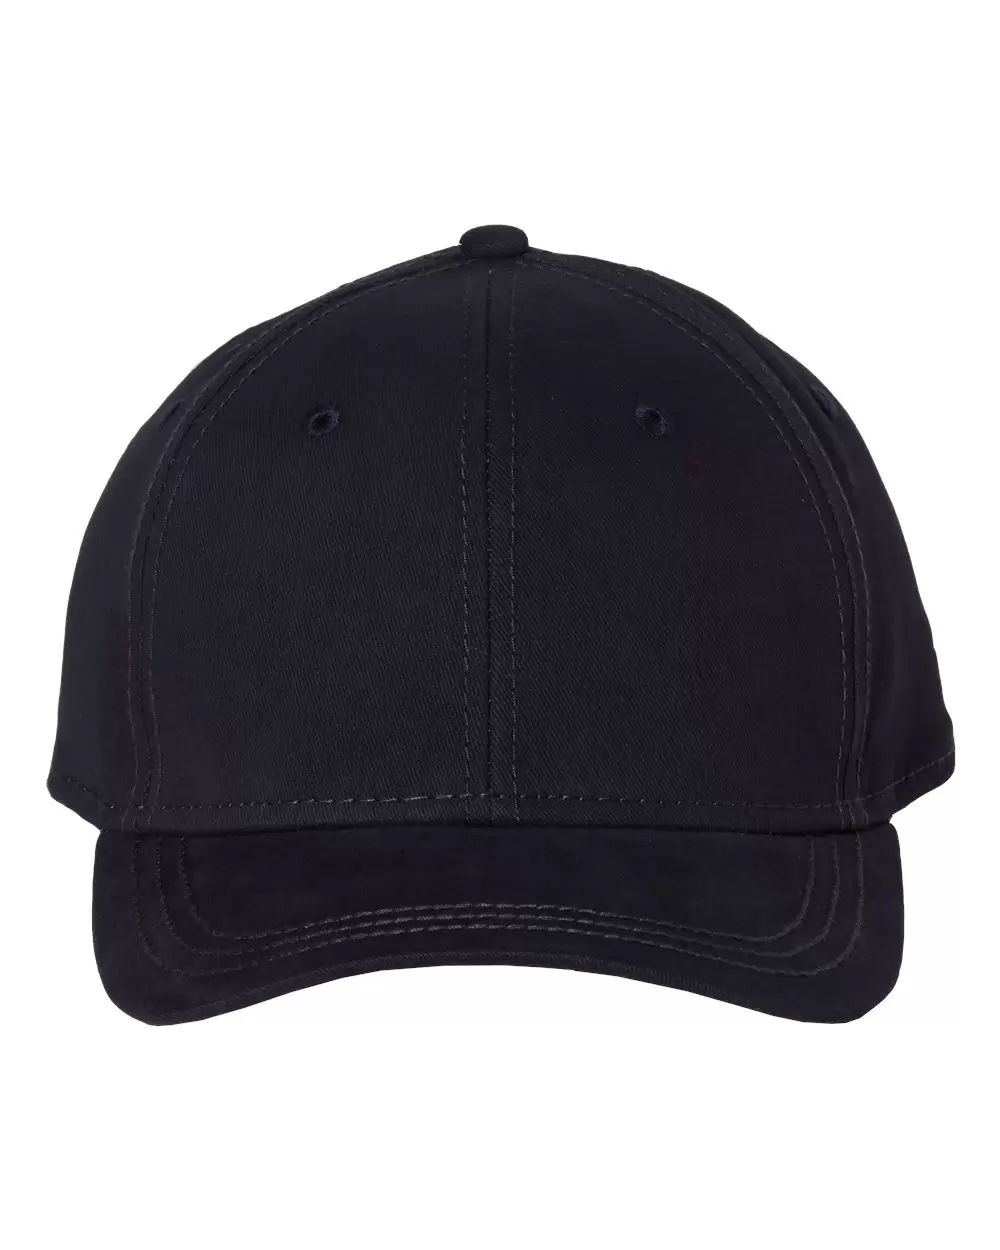 Brushed Twill Cap Personalized  Custom Hats Supplier Imprinted with Logo –  Craft Clothing